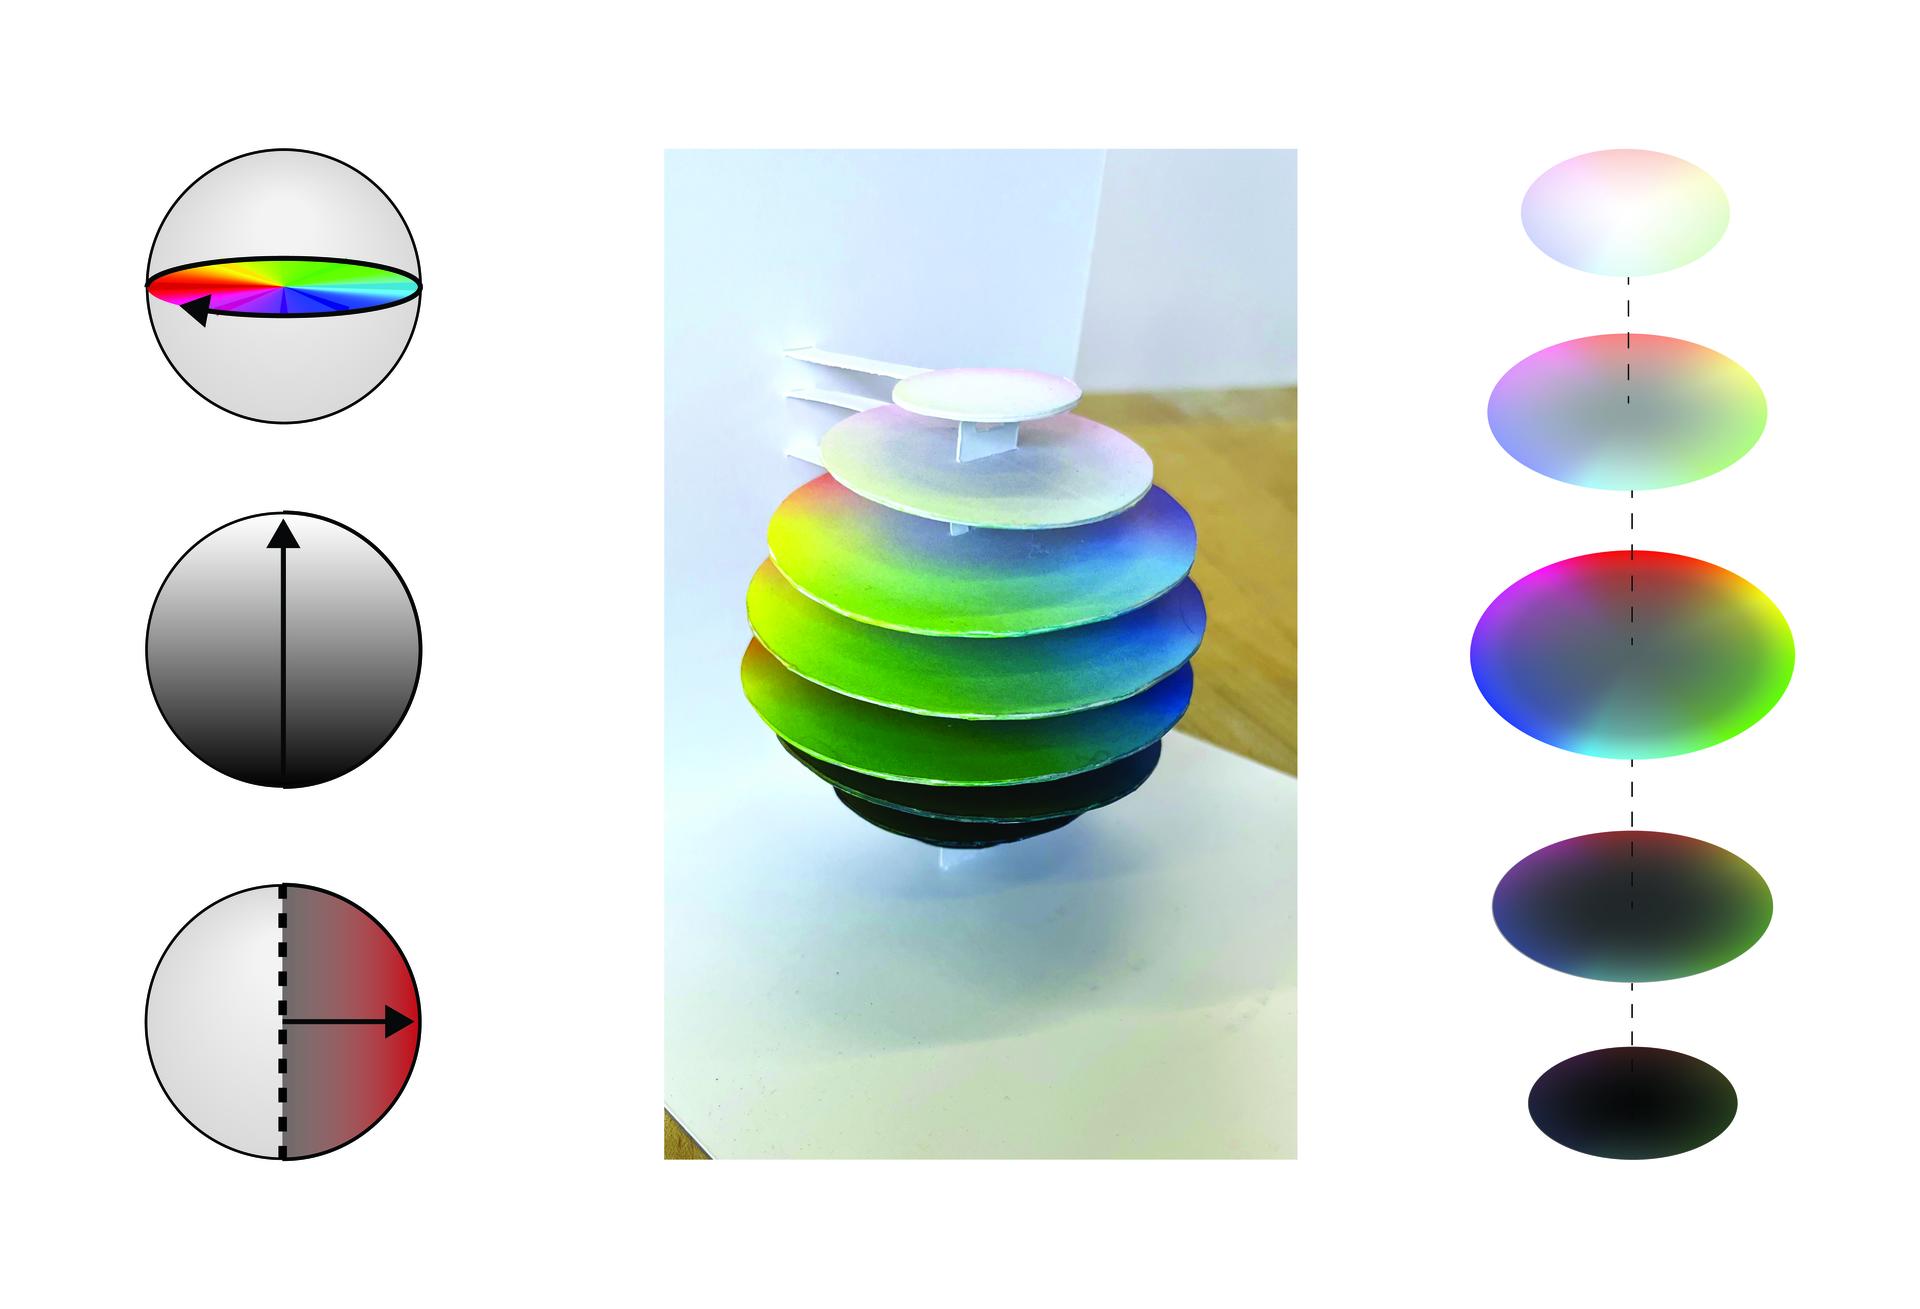 A digital diagram of polar coordinate units as color components, a pop-up model of a color wheel spatialized as a sphere, and a digital diagram of the layers in the pop-up model.